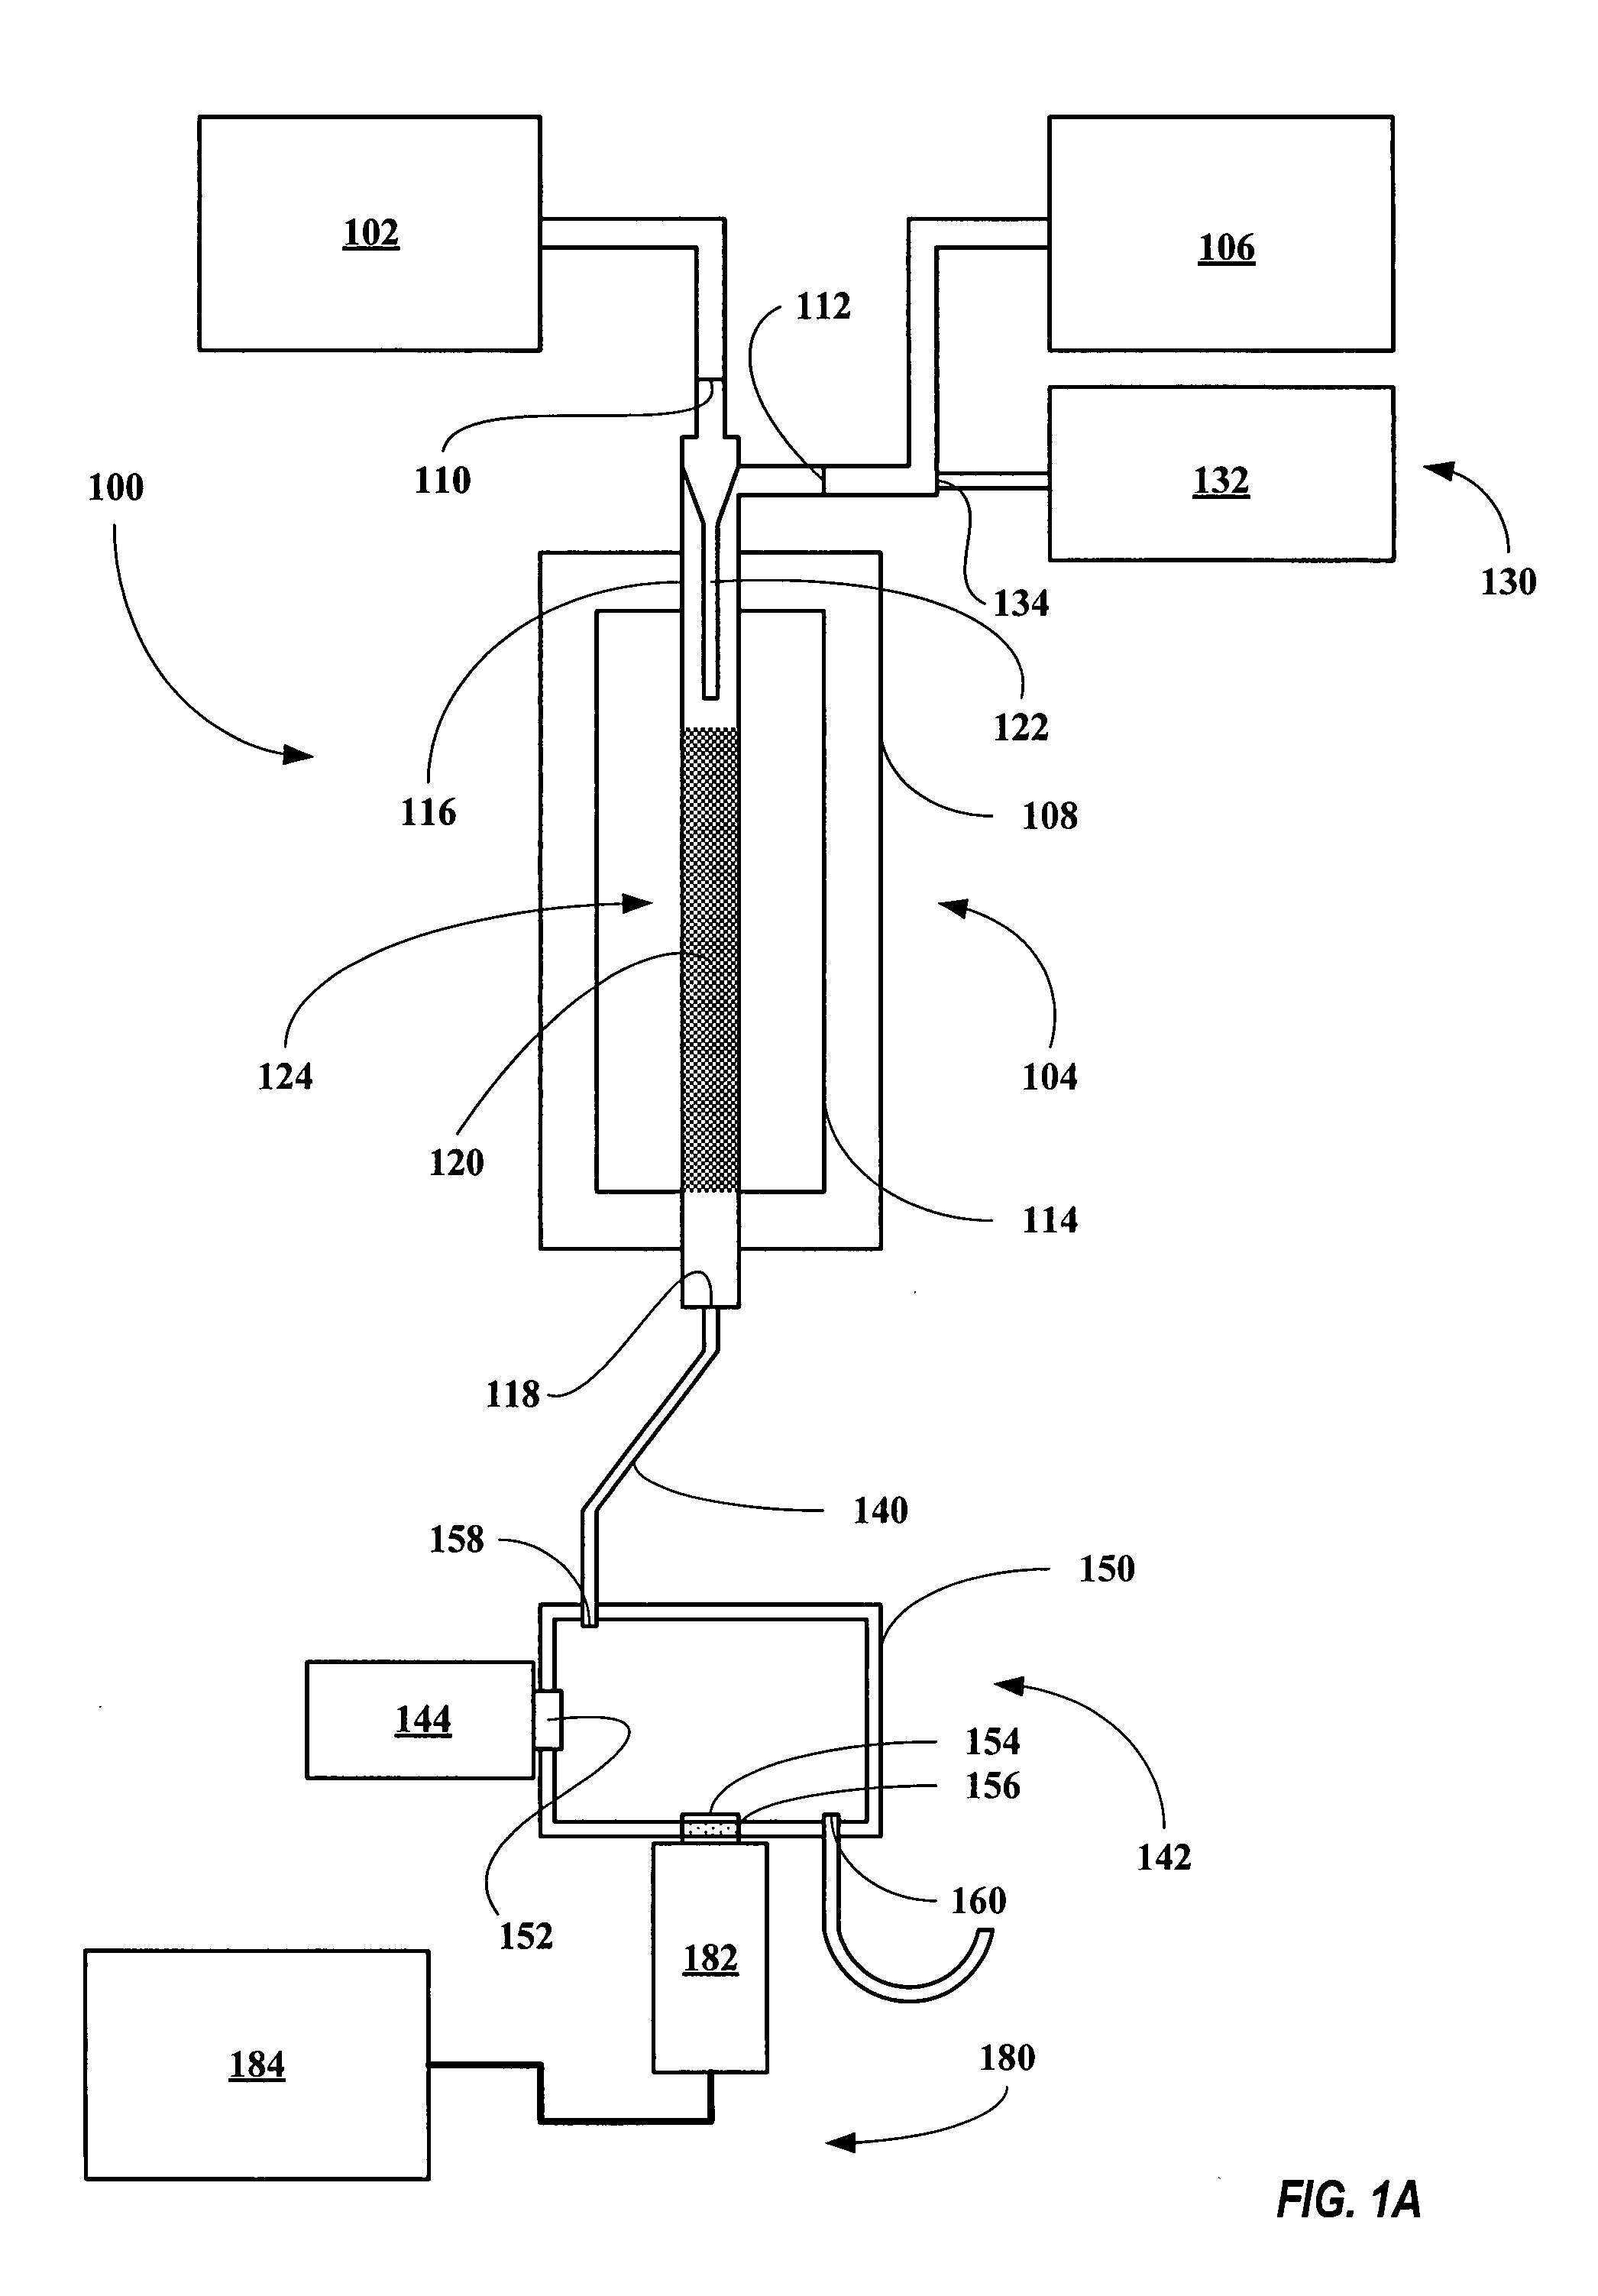 Apparatus for trace sulfur detection using UV fluorescence